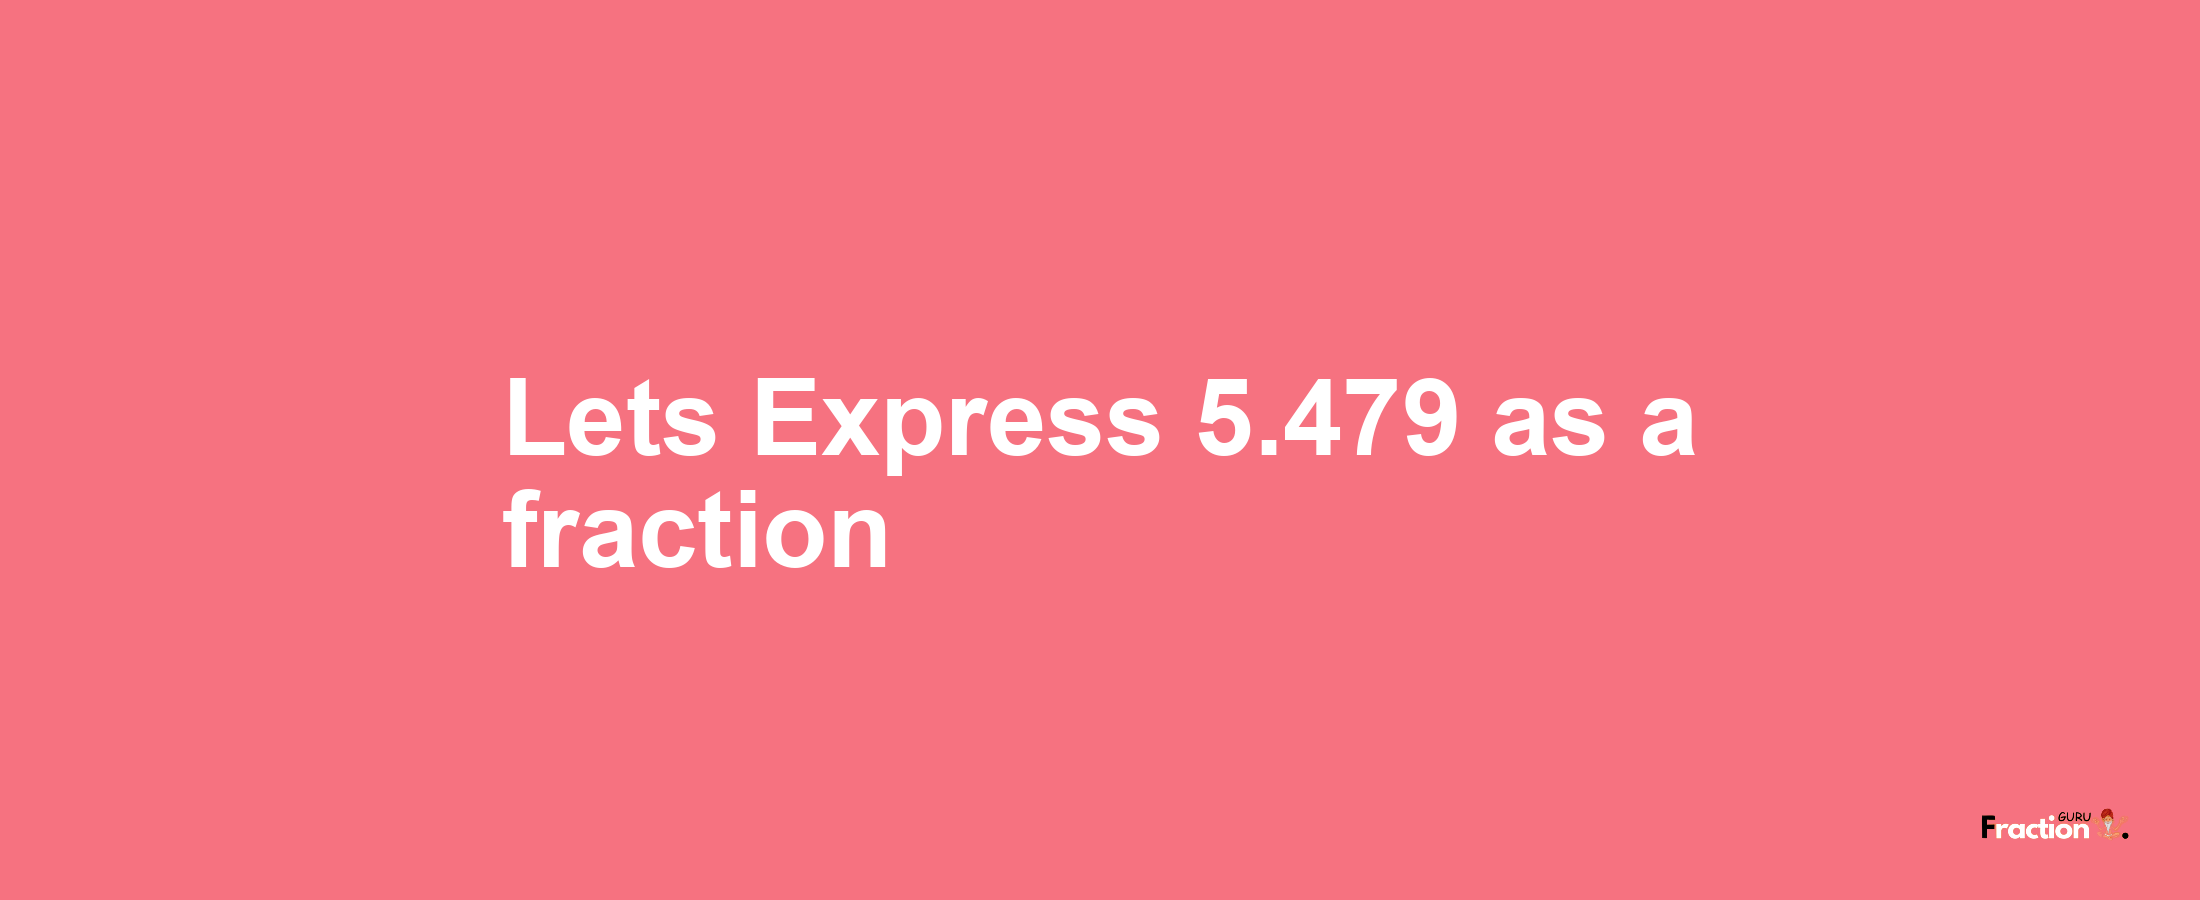 Lets Express 5.479 as afraction